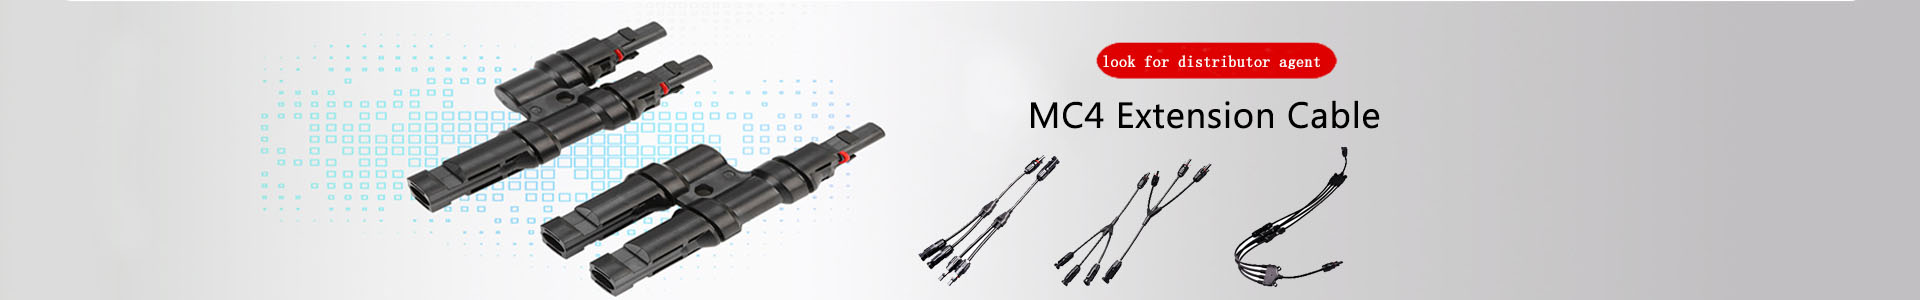 Industry new | Handwe Group-Solar | solar connector,solar branch connector,diode fuse connector,MC4 extnsion cable,H1Z2Z2 solar cable, UL4703 solar cable | Leading manufacturer and supplier of solar pv cables and connectors